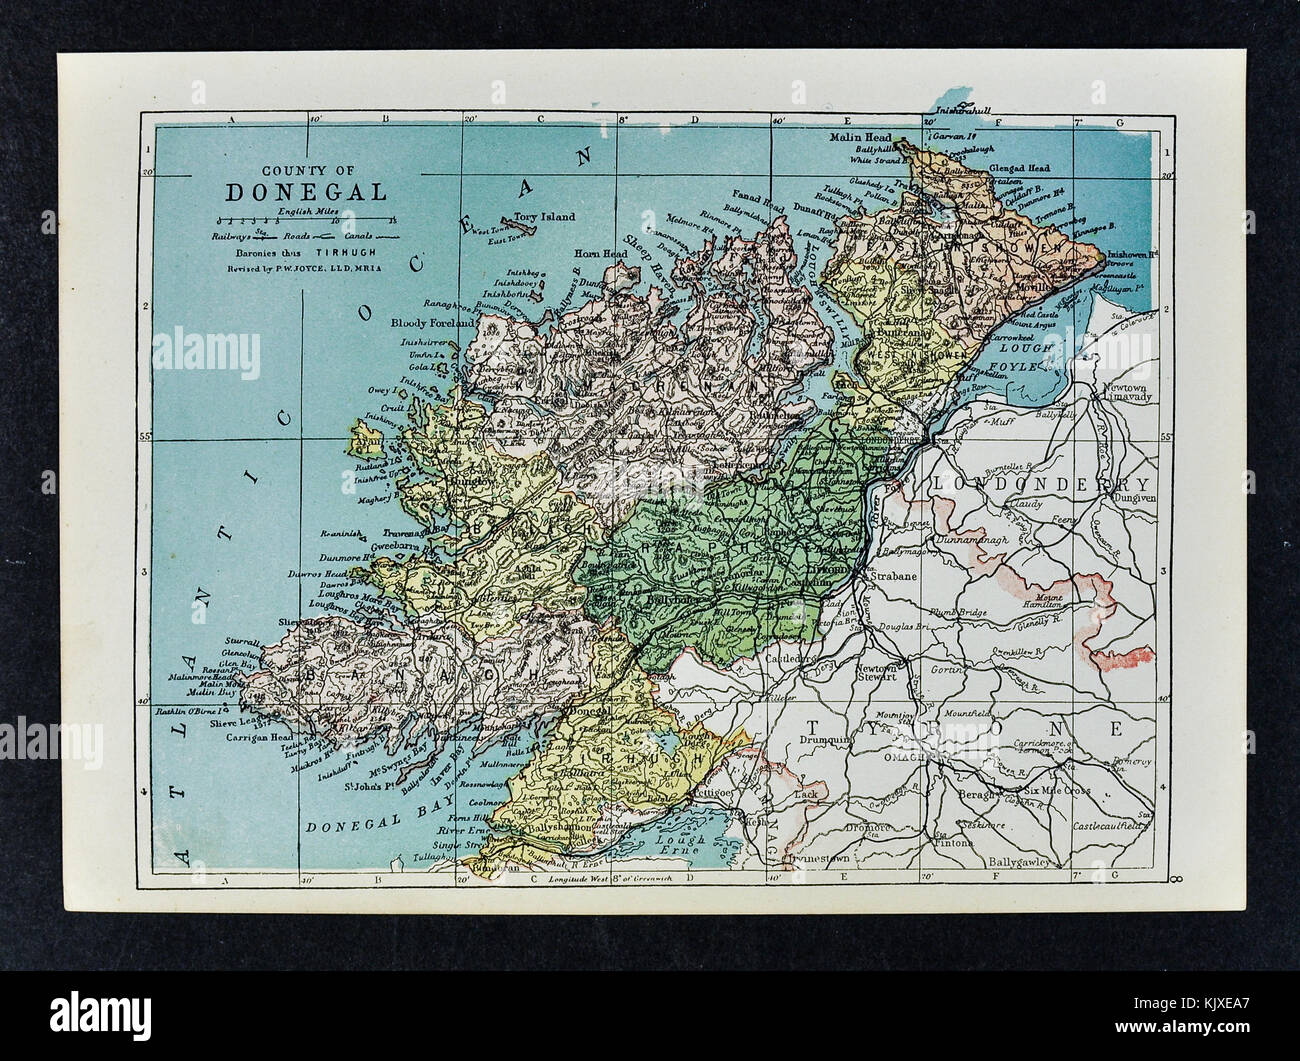 Antique Ireland Map - Donegal County - Ballyshannon Londonberry Moville Lifford Stock Photo